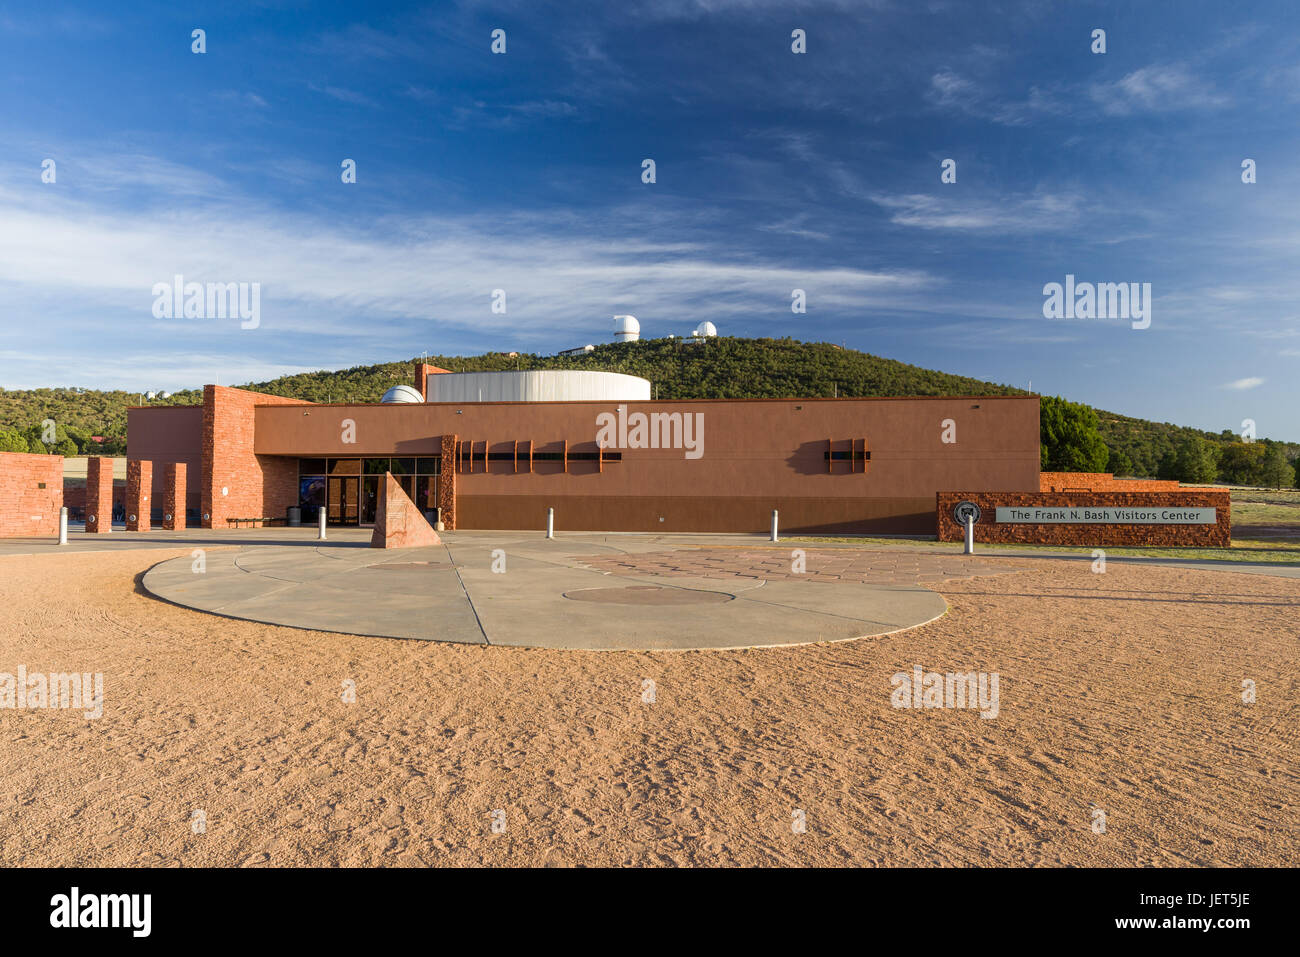 McDonald Observatory Frank N. Bash Visitors Center Exterior with Harlan J. Smith Telescope in background, Texas Stock Photo